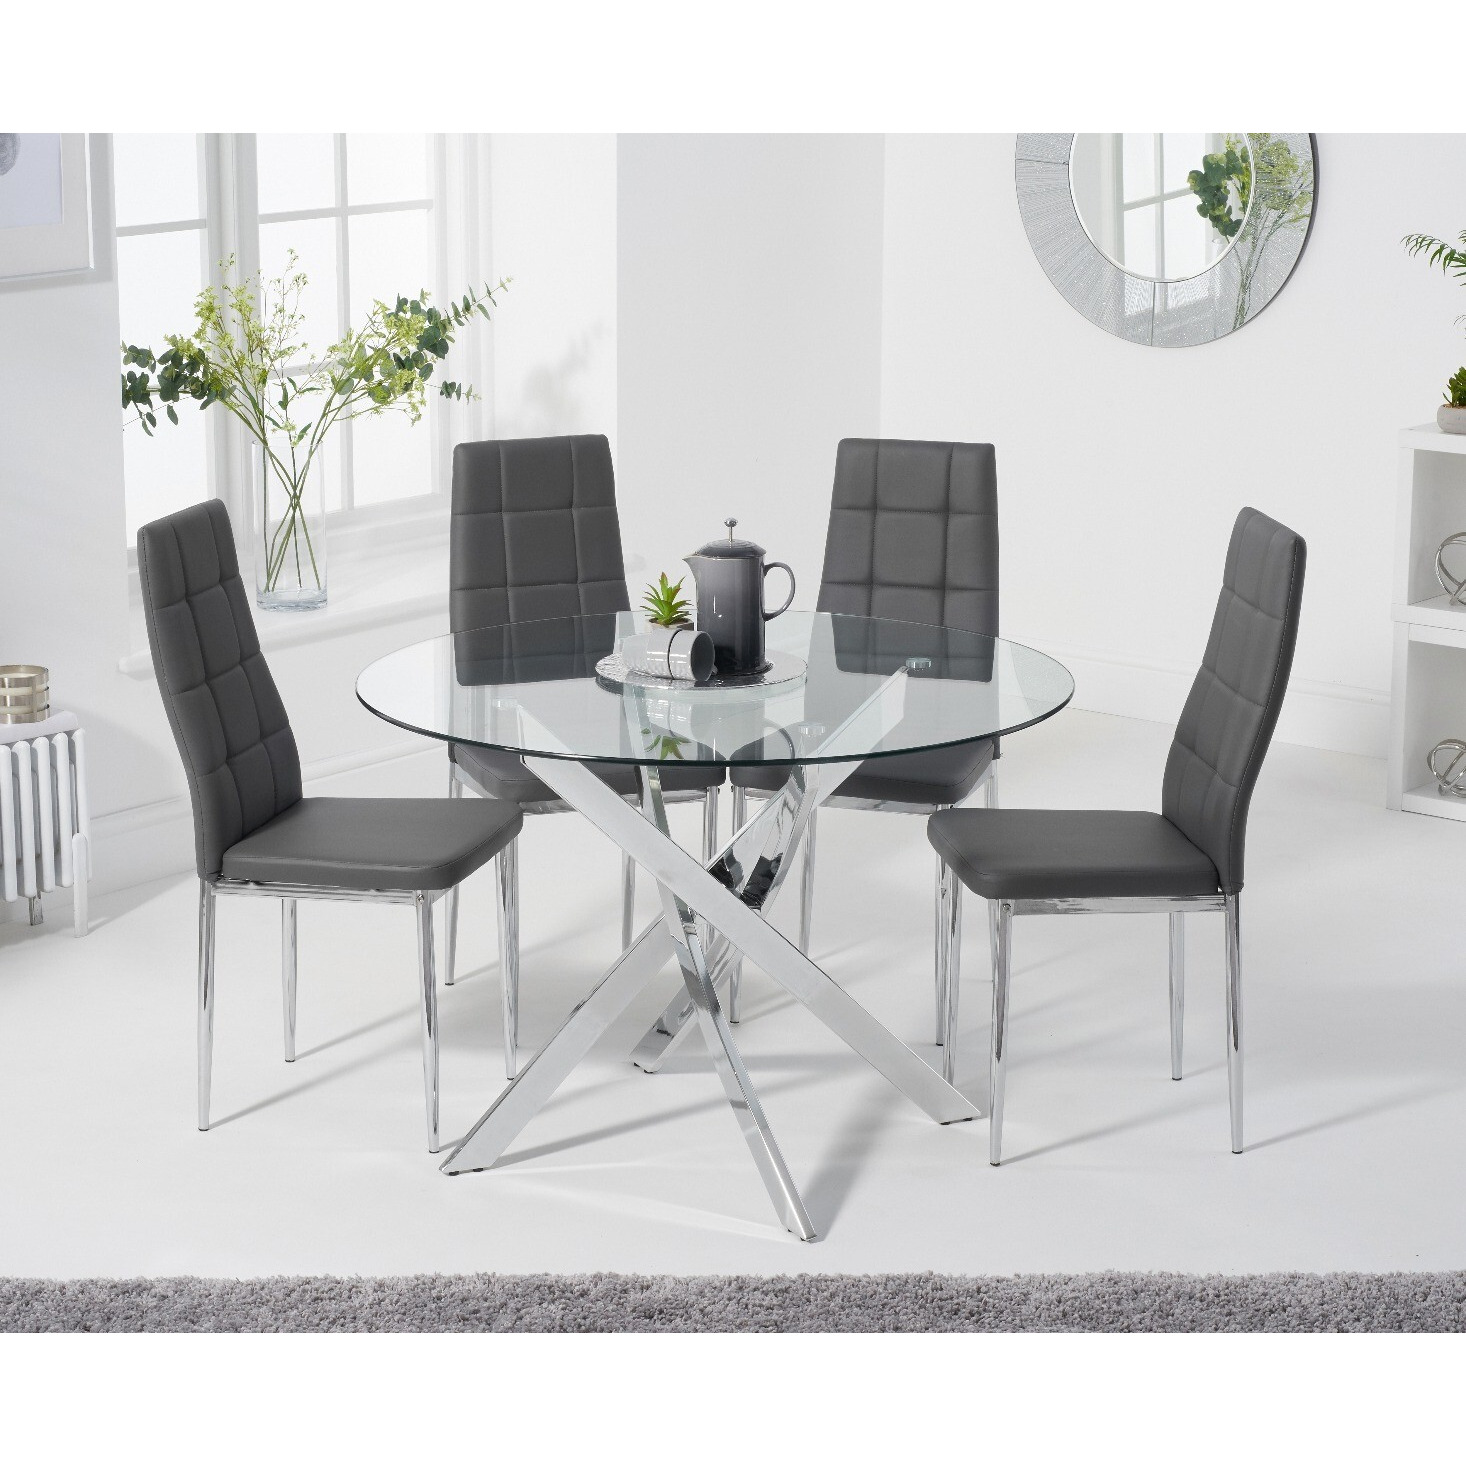 Denver 110cm Glass Dining Table with 4 Grey Angelo Faux Leather Chairs